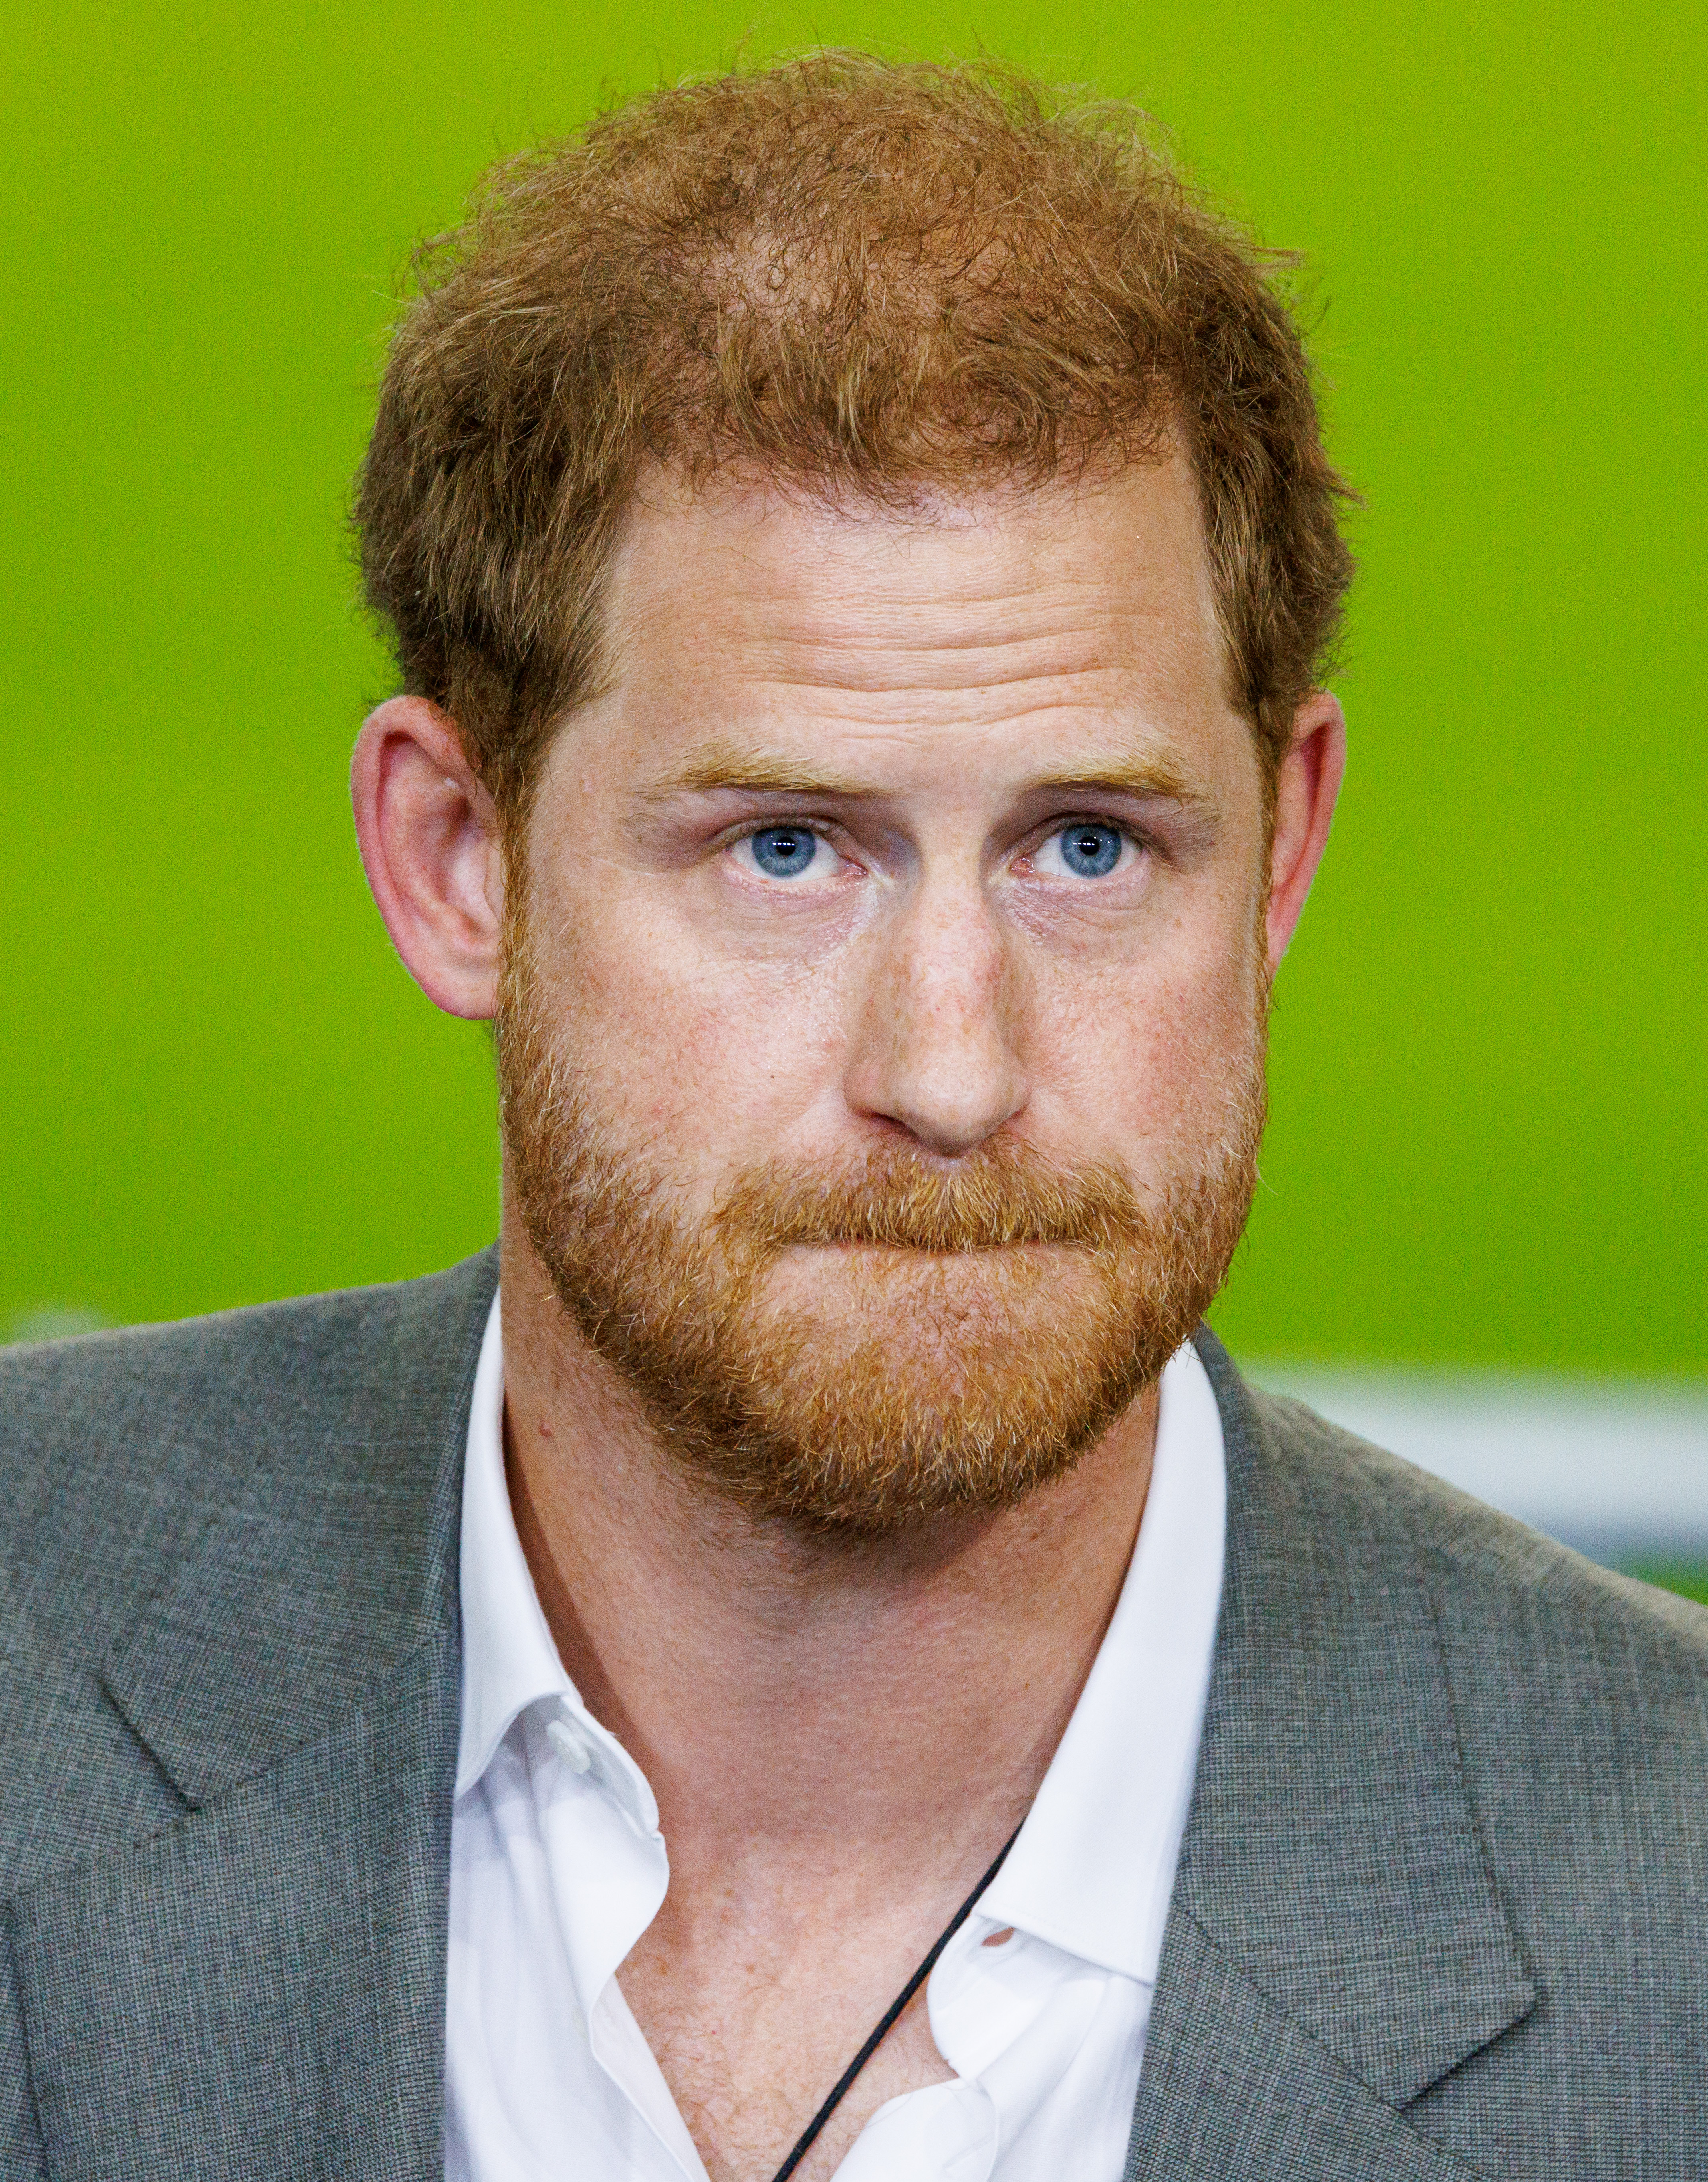 Prince Harry on September 6, 2022 in Dusseldof, Germany | Source: Getty Images